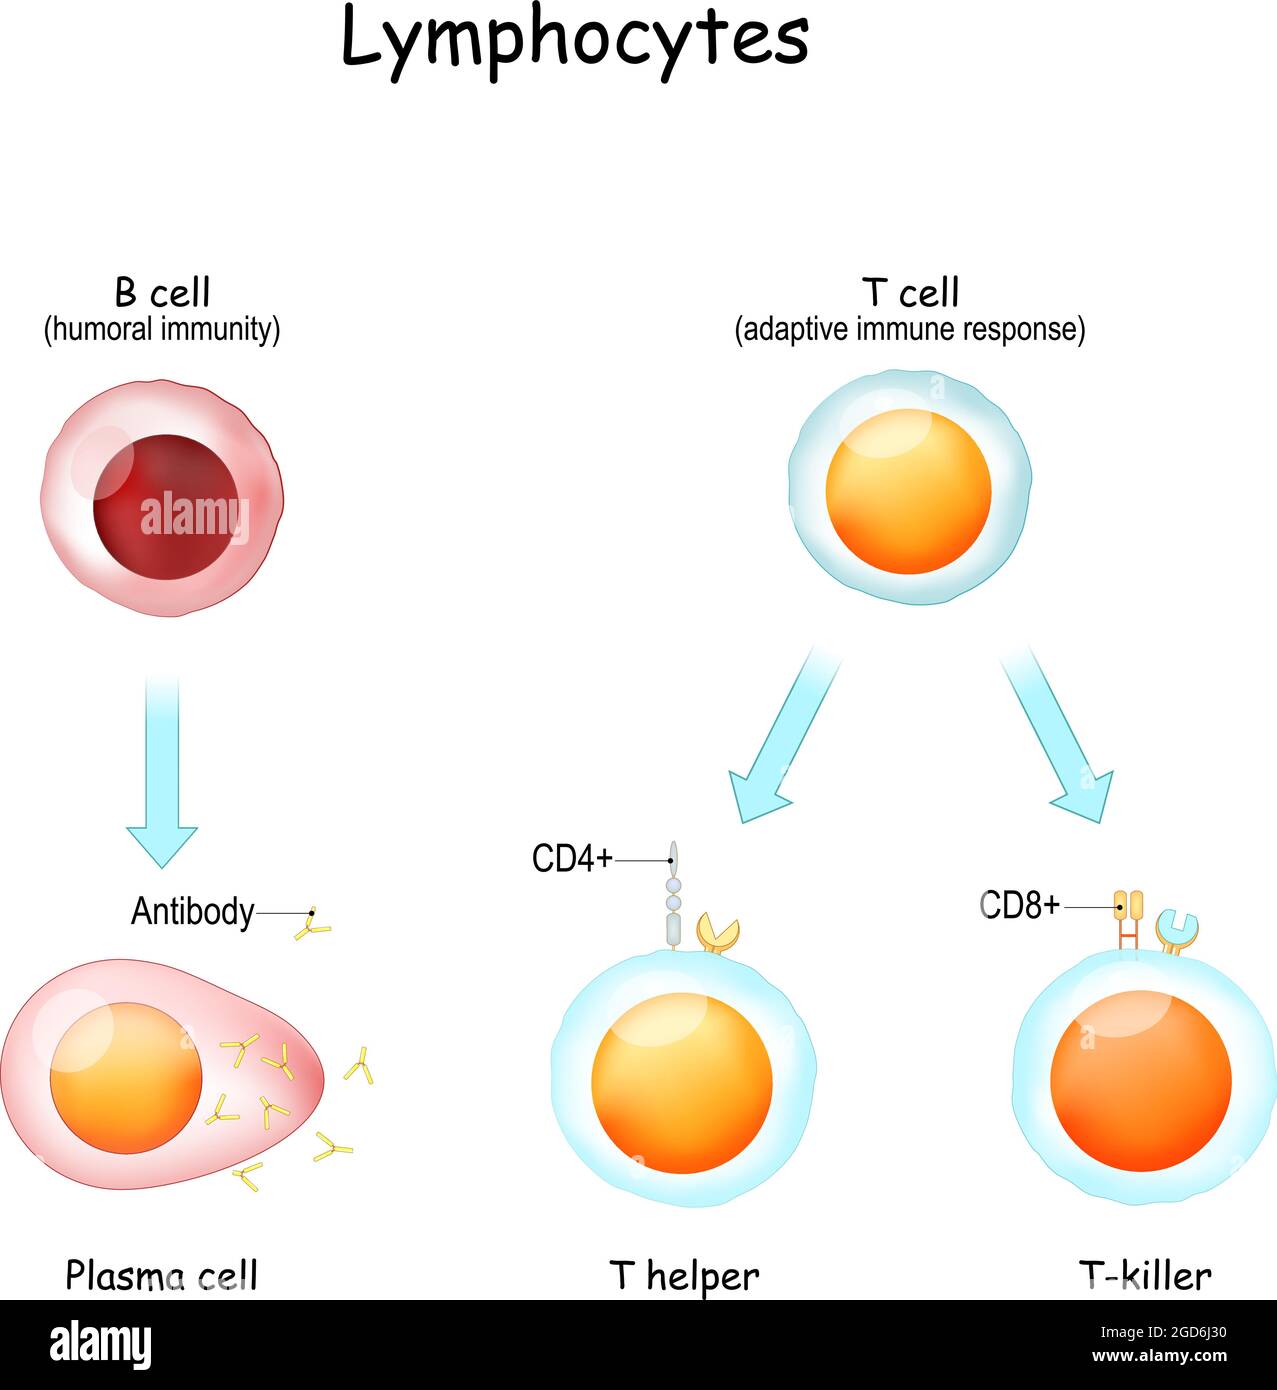 Lymphocytes. B cell for humoral immunity. T-cell for adaptive immune response. Vector illustration. Poster Stock Vector